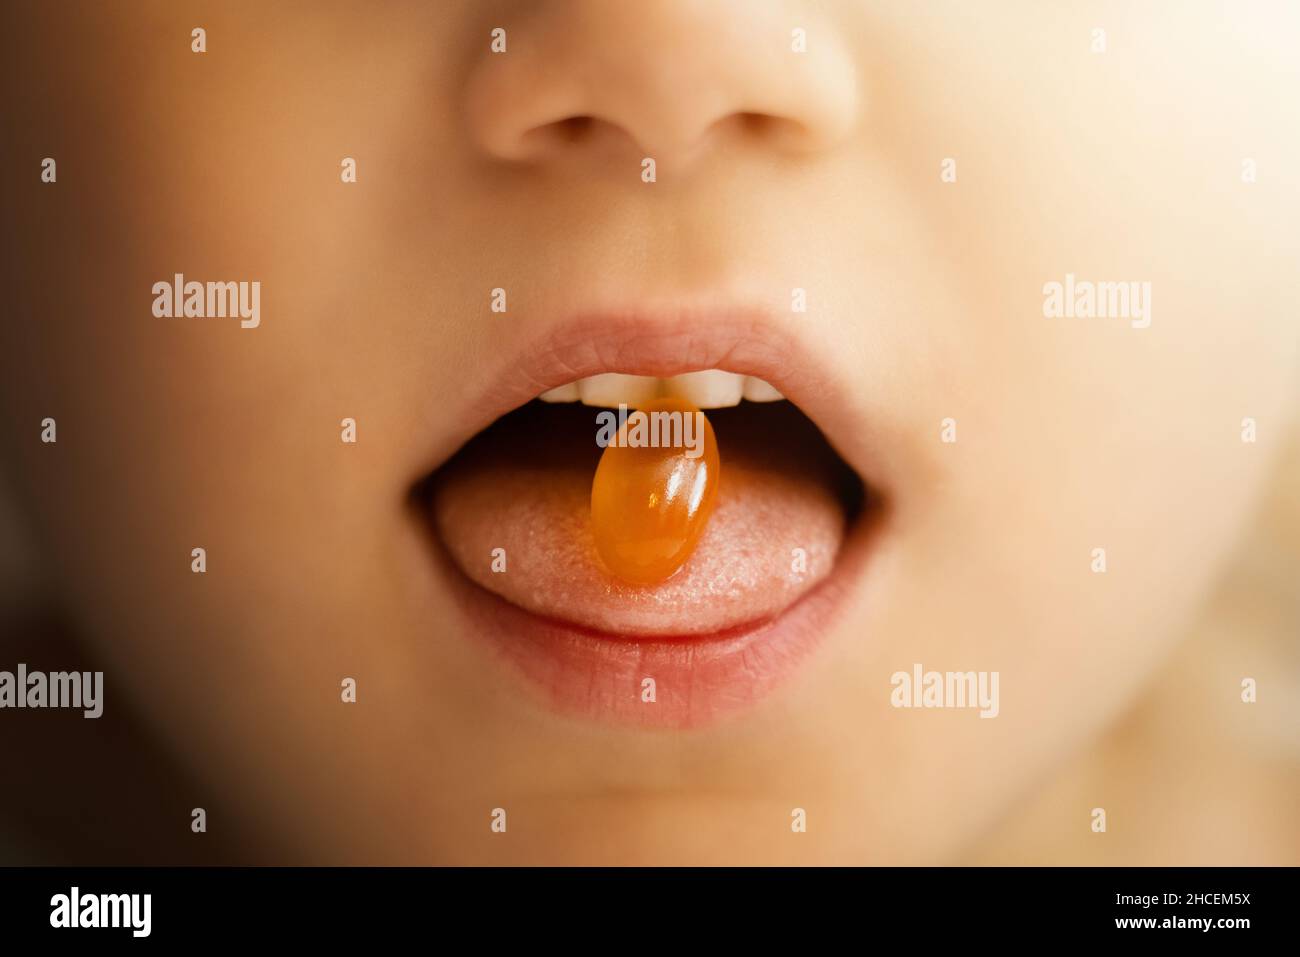 child takes omega 3 capsule. mouth closeup with fish oil pill. dietary supplements Stock Photo